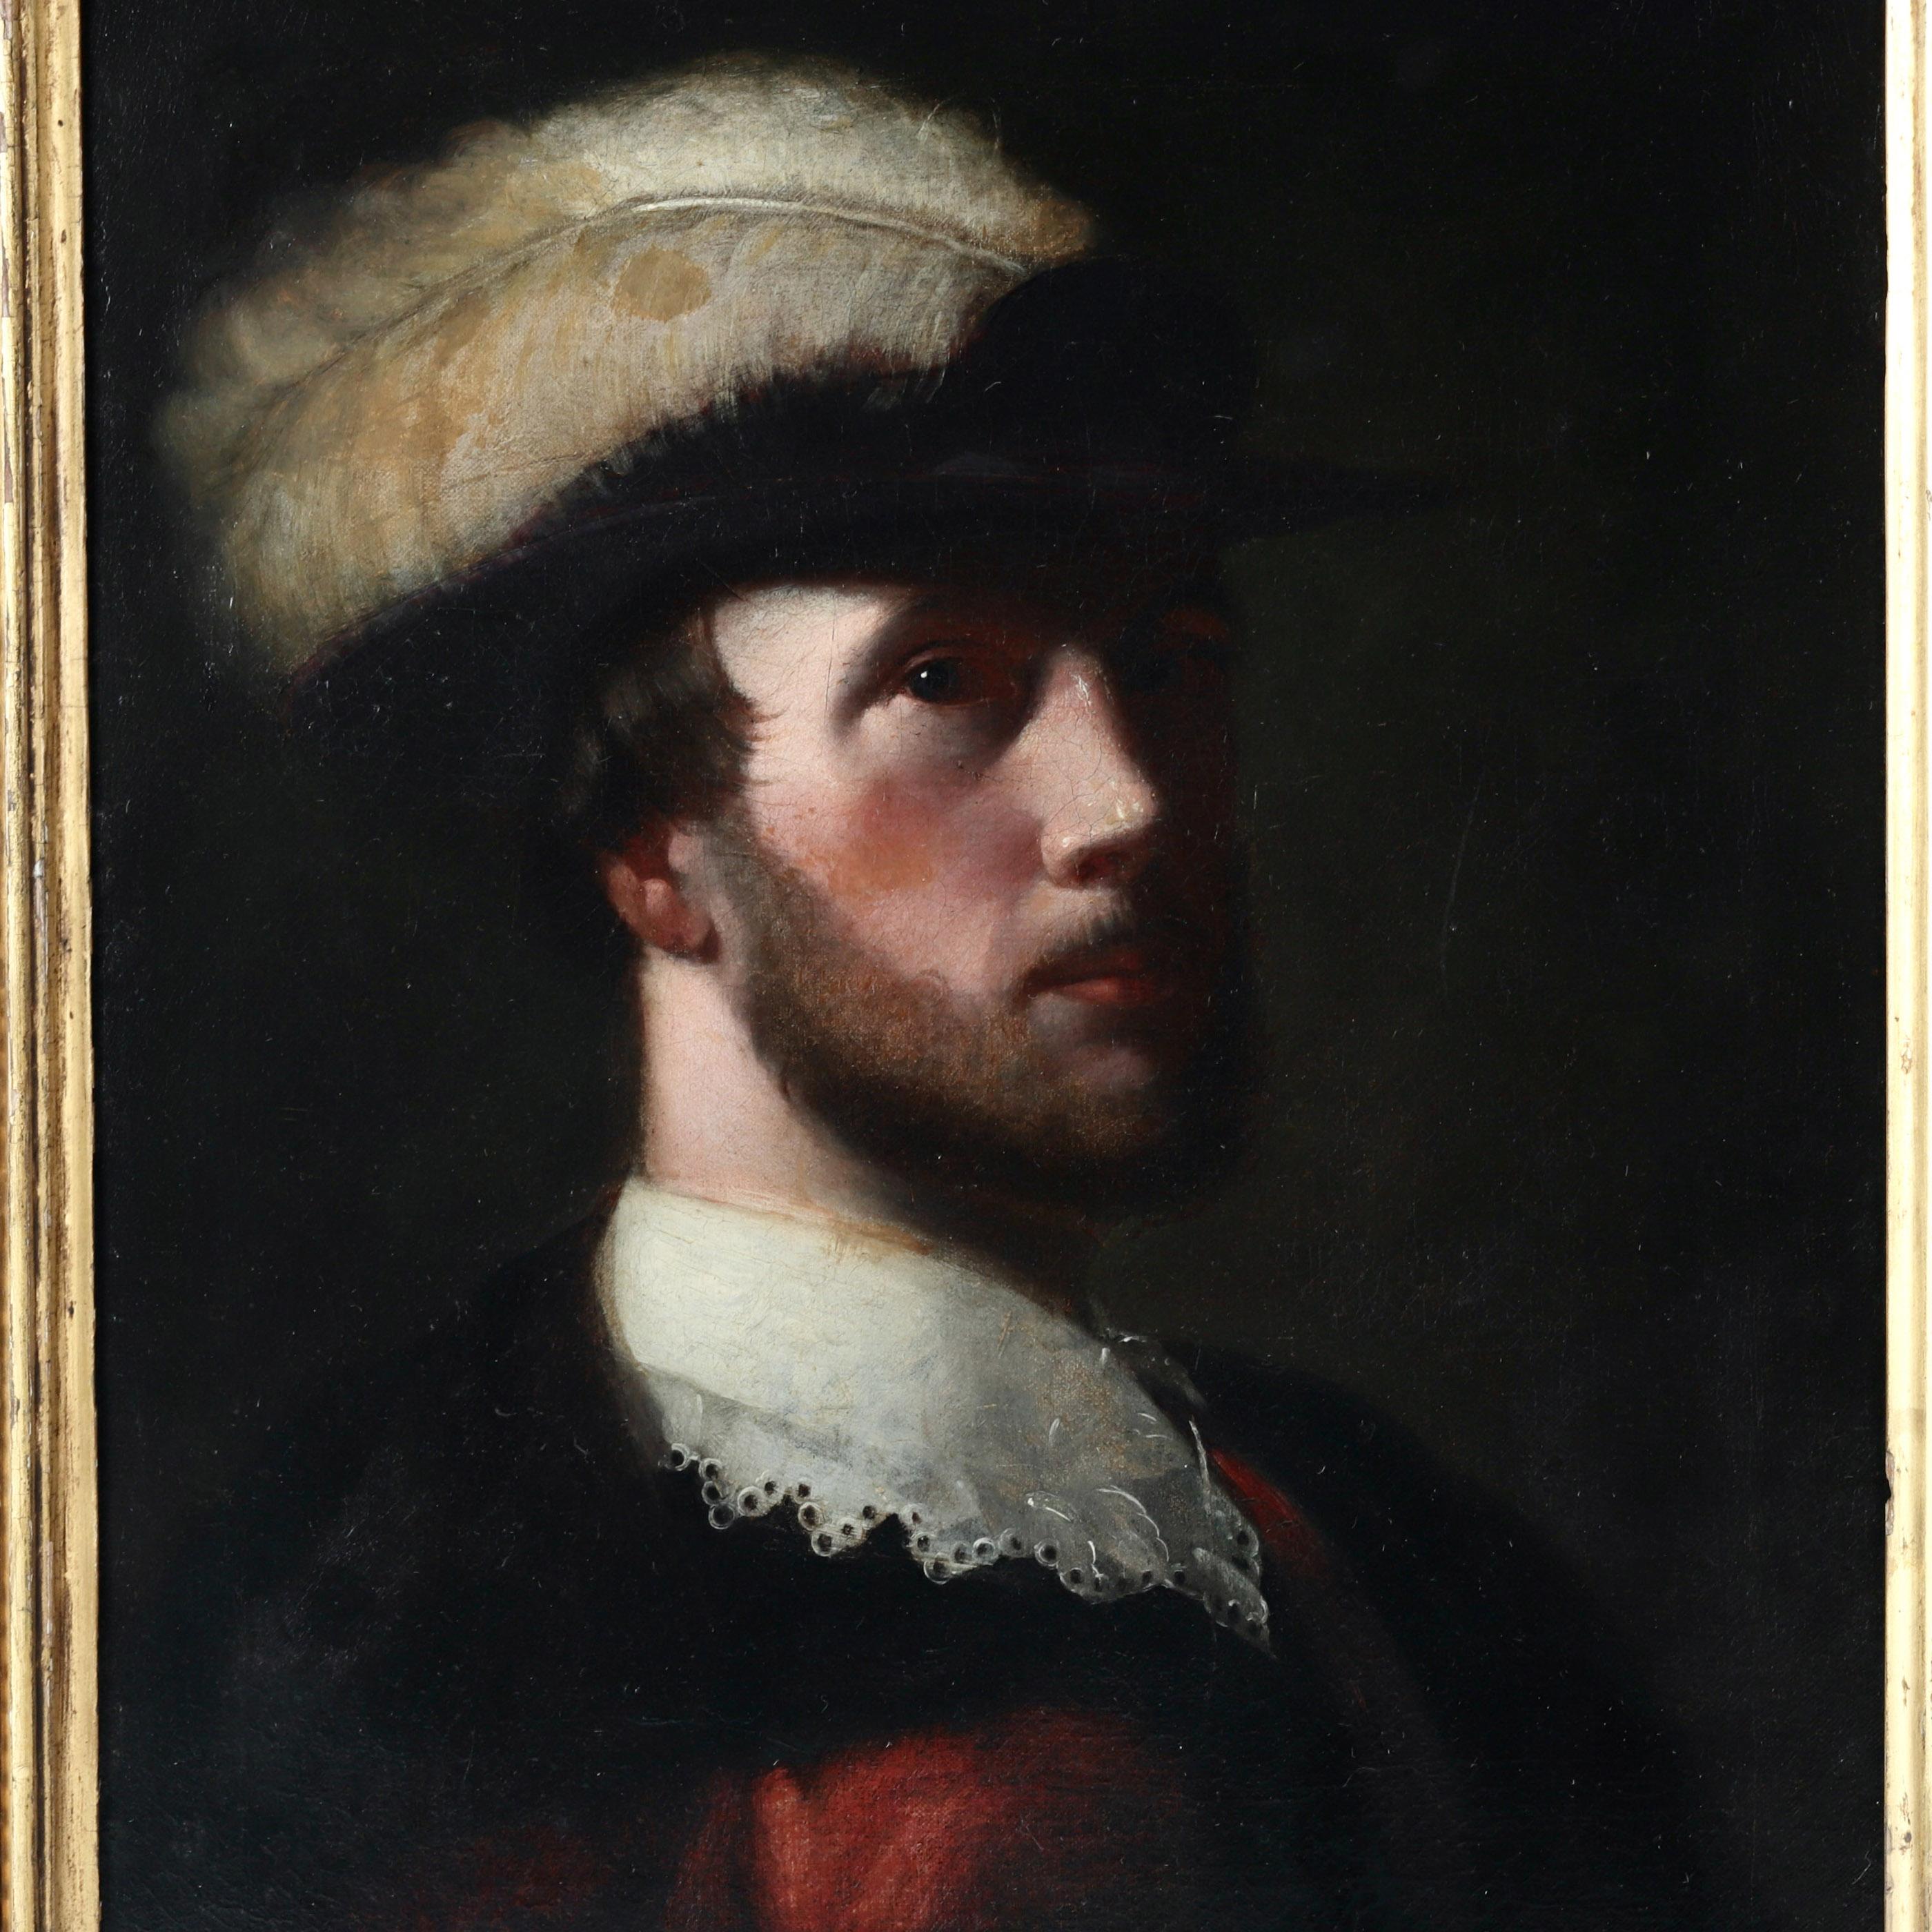 OIL ON CANVAS PORTRAIT Follower of Rembrandt Van Rijin (1606 -1669)
A well executed 18th century portrait study of a young military man, in formal dress with a feather plume.
